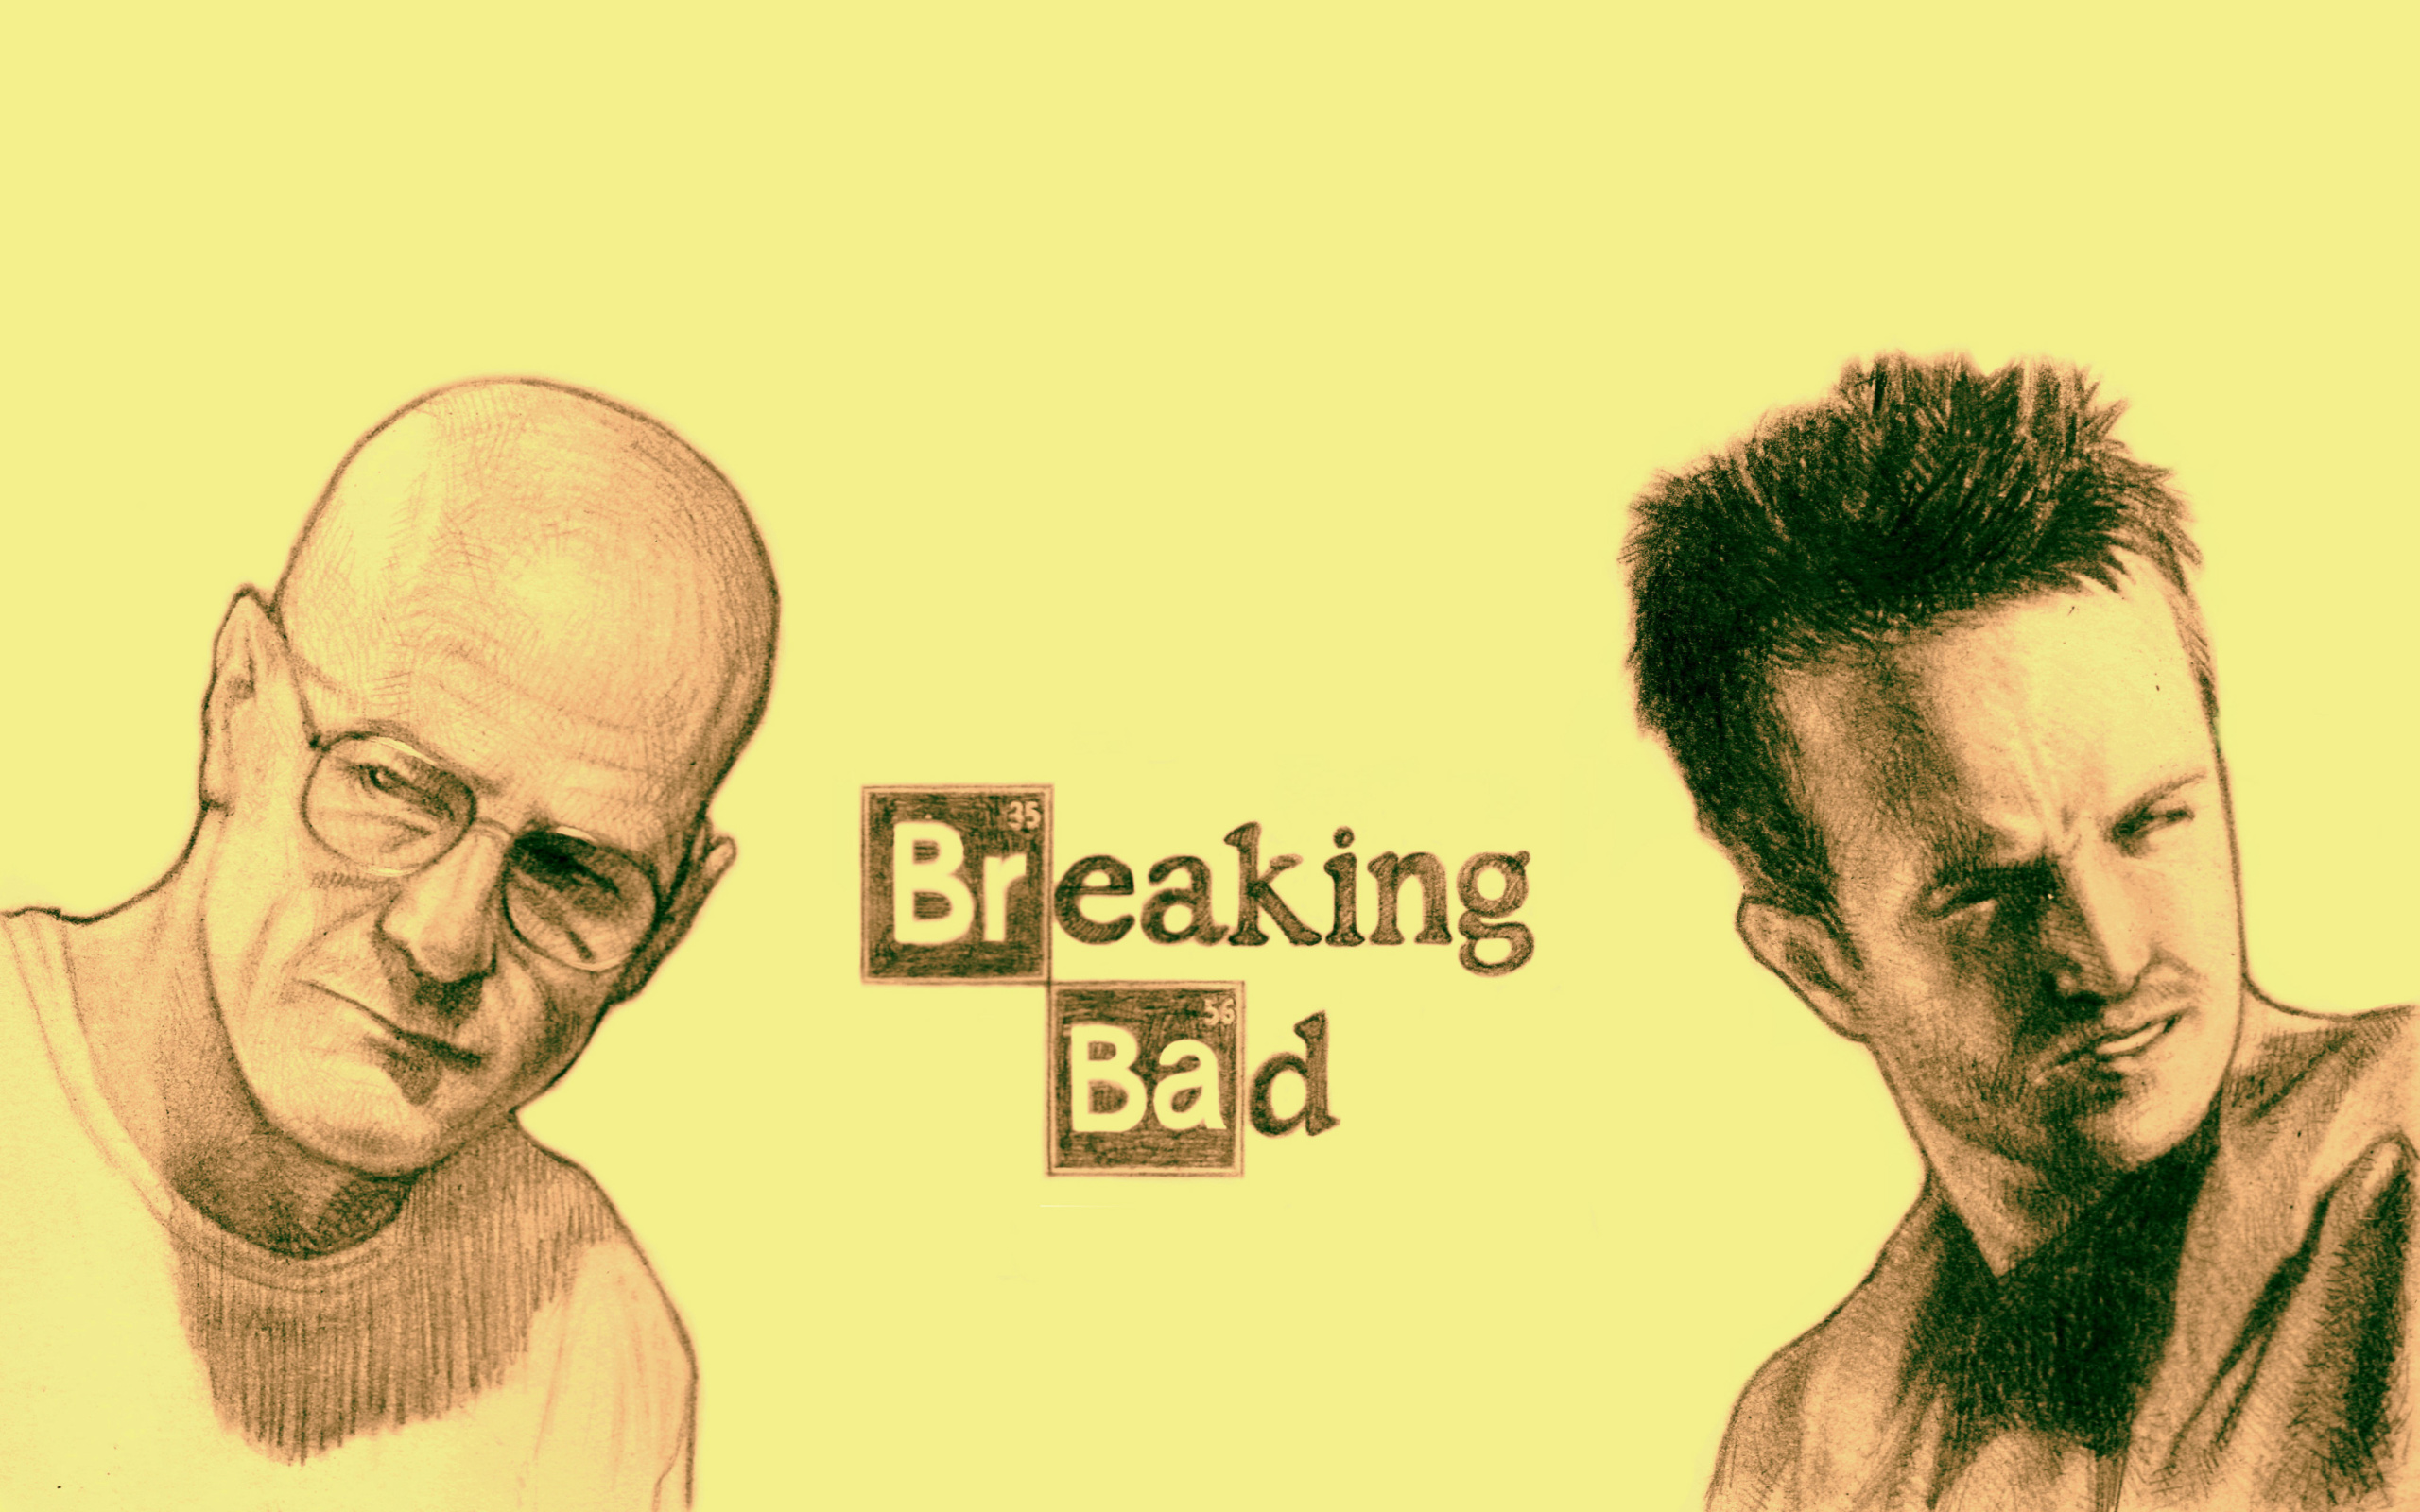 Walter White and Jesse Pinkman in Breaking Bad wallpaper 2560x1600